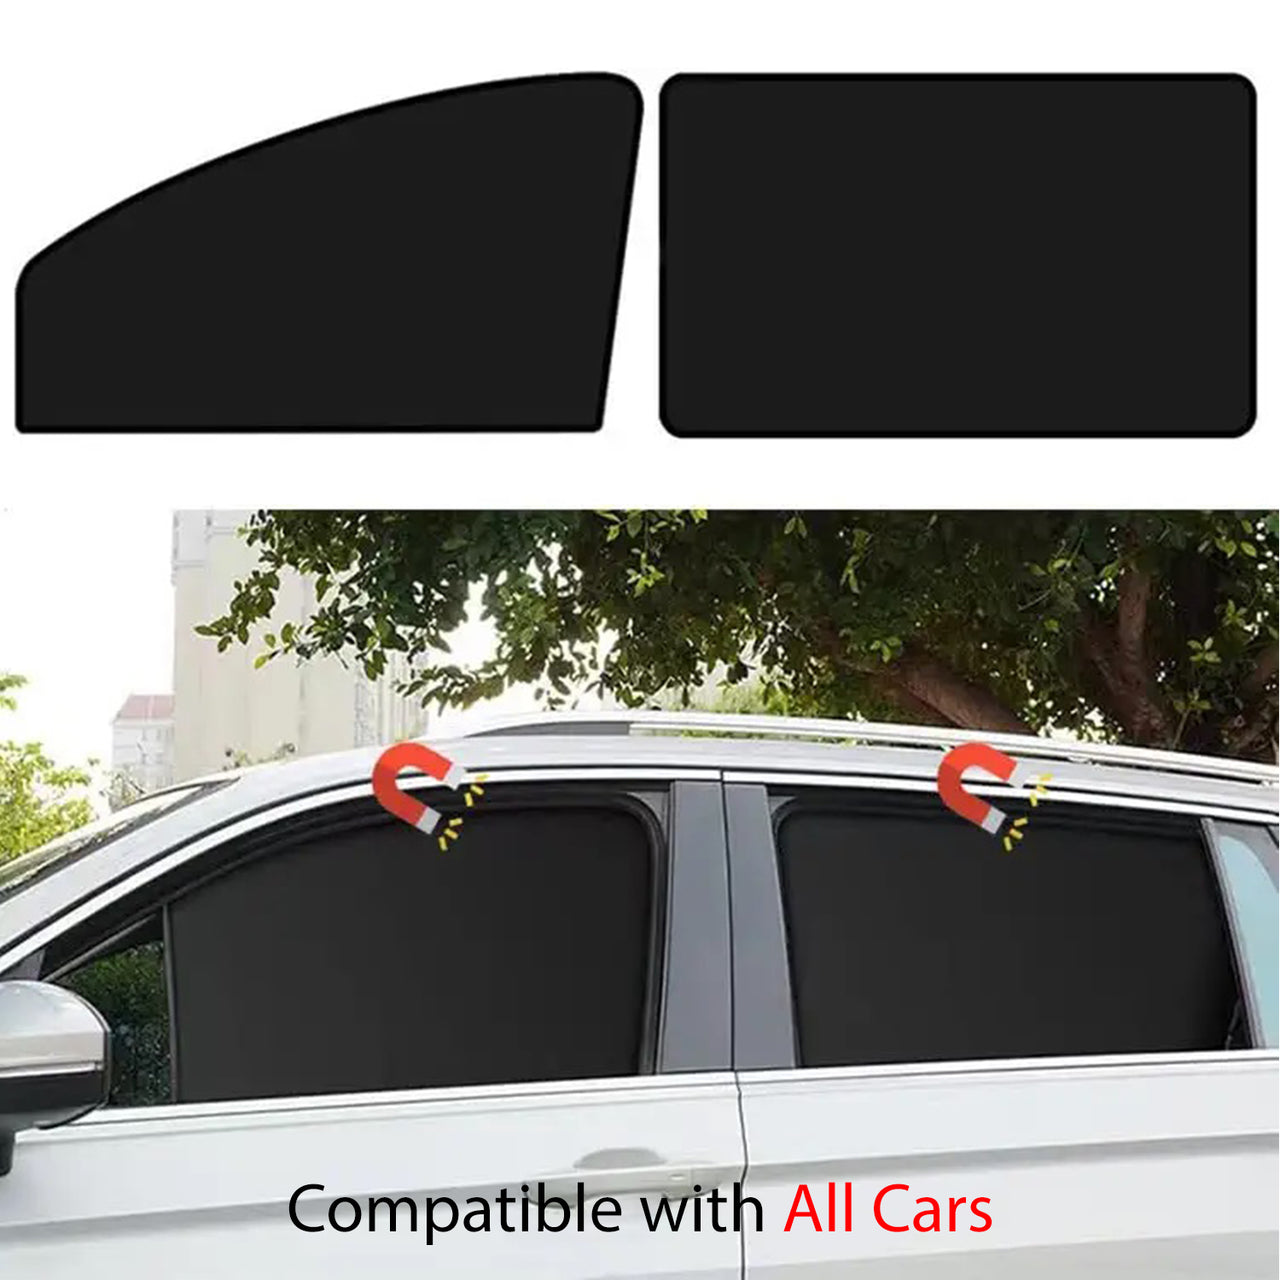 Car Side Window Sun Shades, Custom Fit For Your Cars, Window Sunshades Privacy Curtains, 100% Block Light for Breastfeeding, Taking a nap, Changing Clothes, Camping KO15980